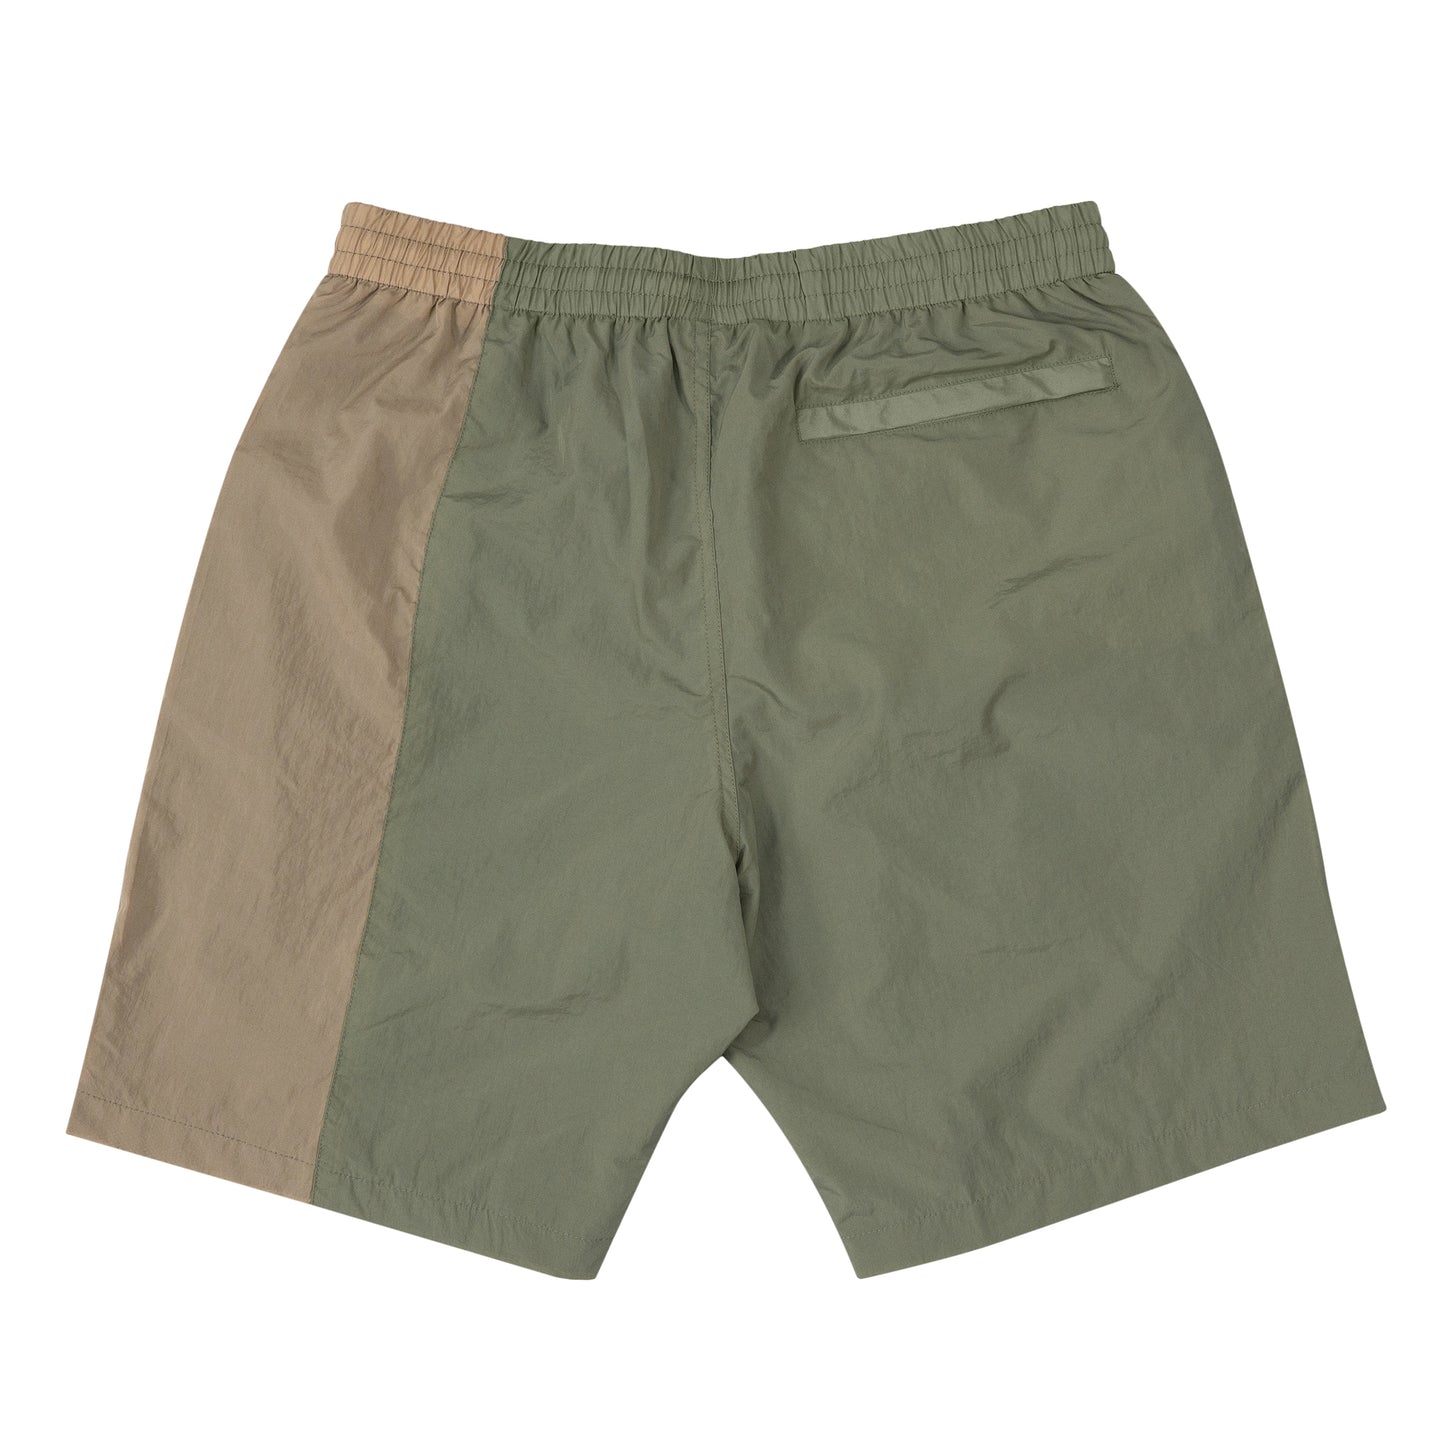 Load image into Gallery viewer, Nylon Water Shorts - Olive|Tan
